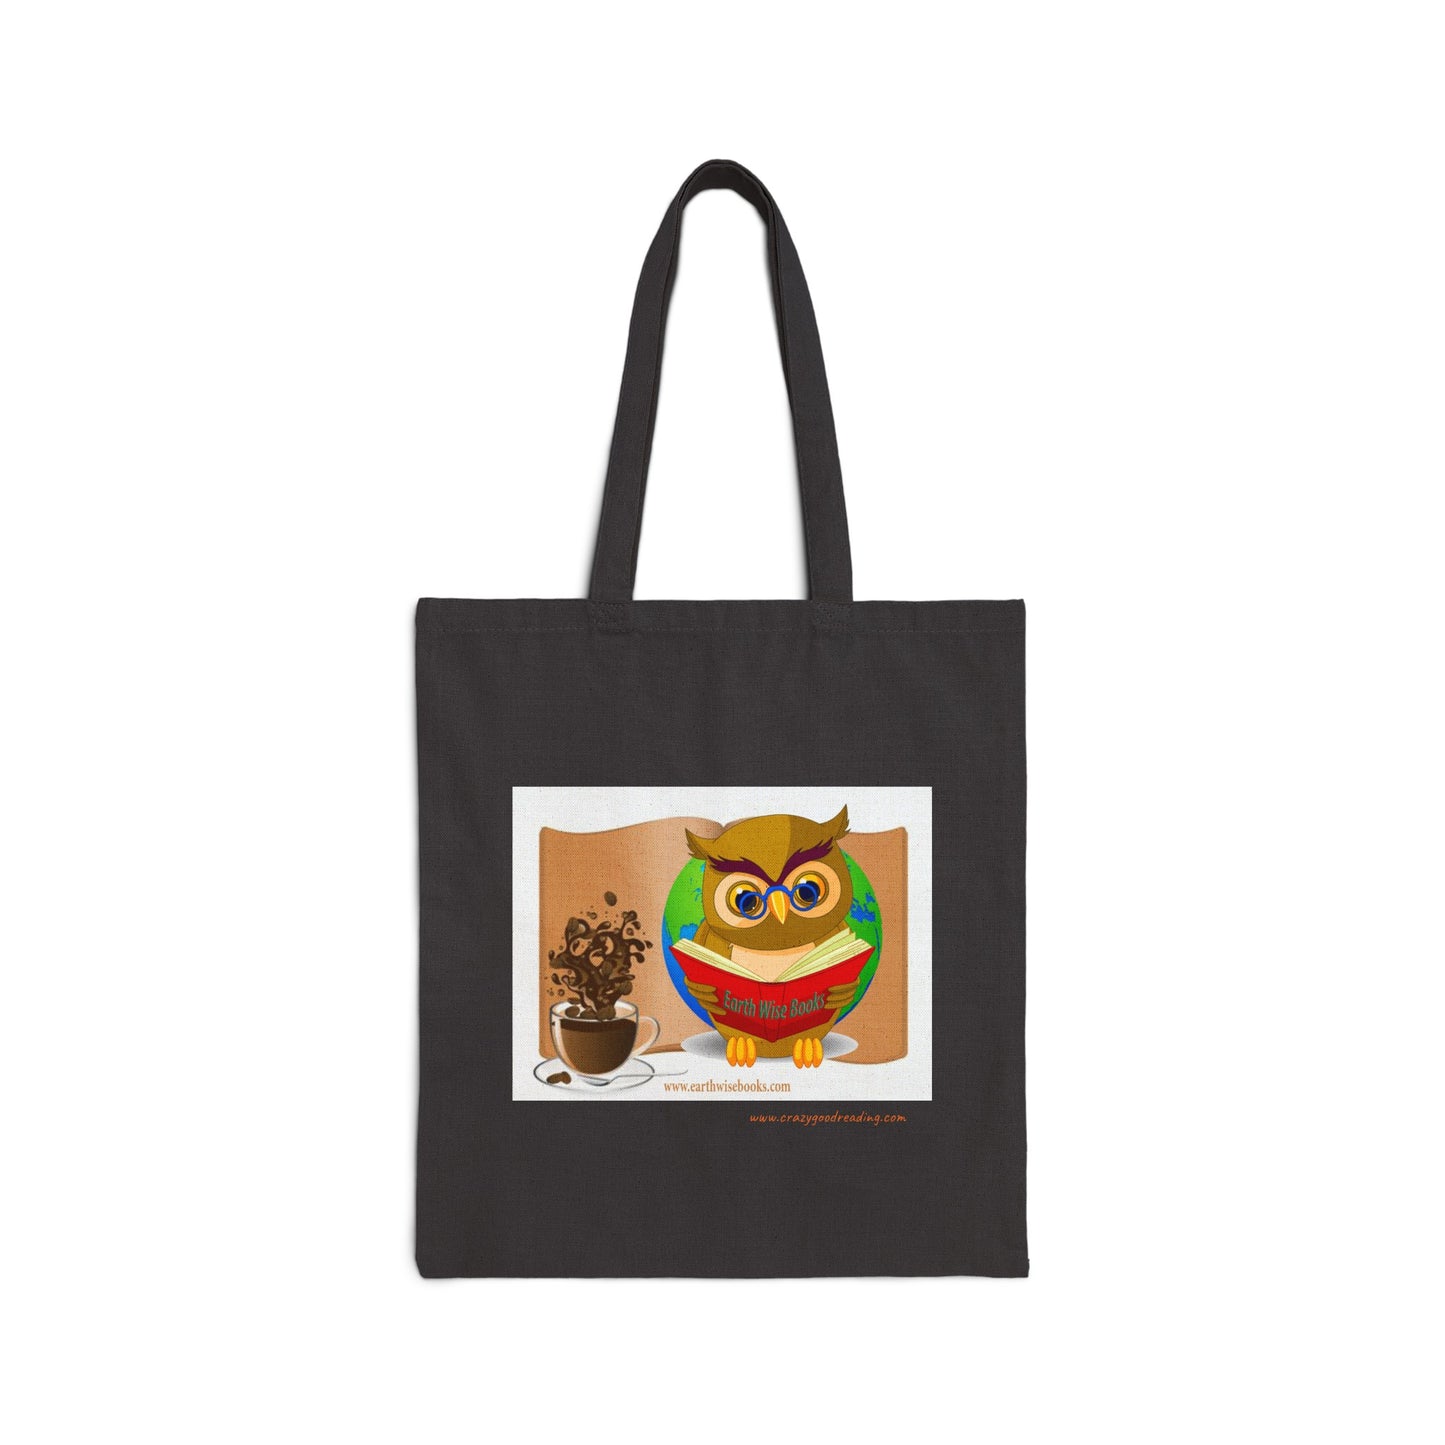 Cotton Canvas Tote Bag "Owl with coffee"